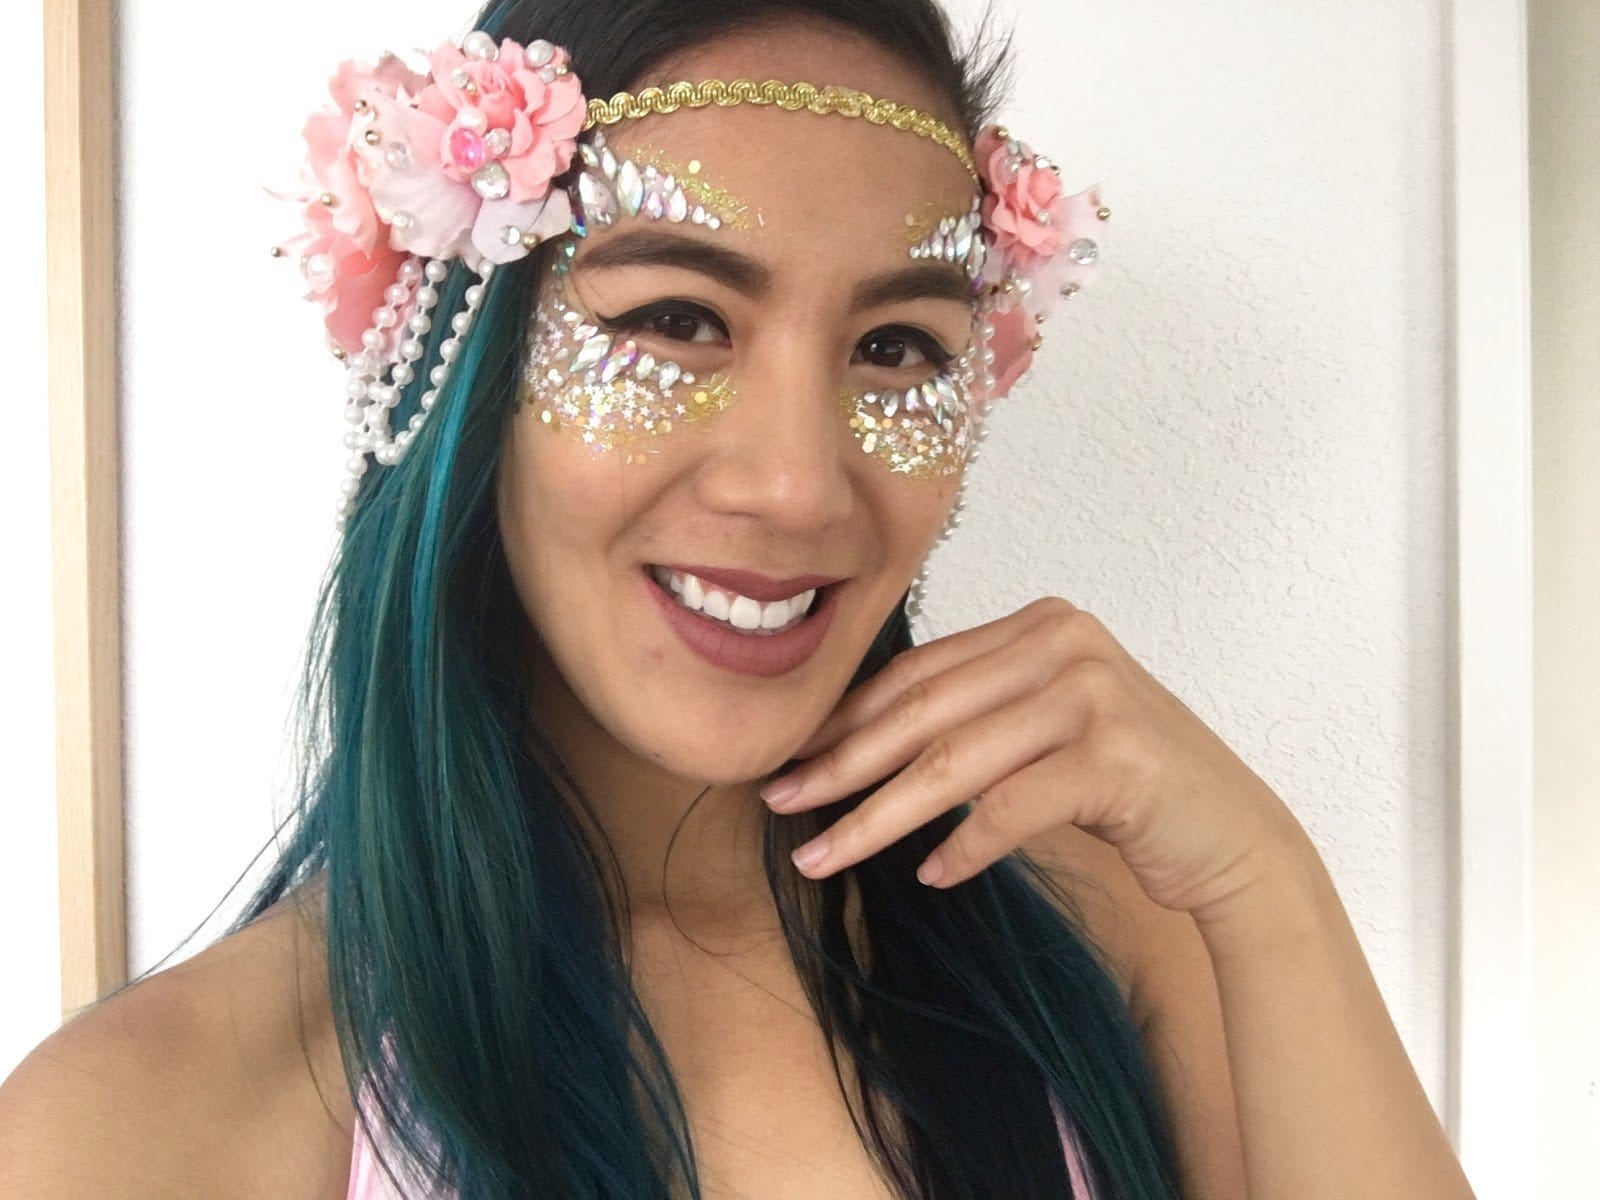 Heres Part 1 of my DIY sparkly bra for EDC next week! I hope I